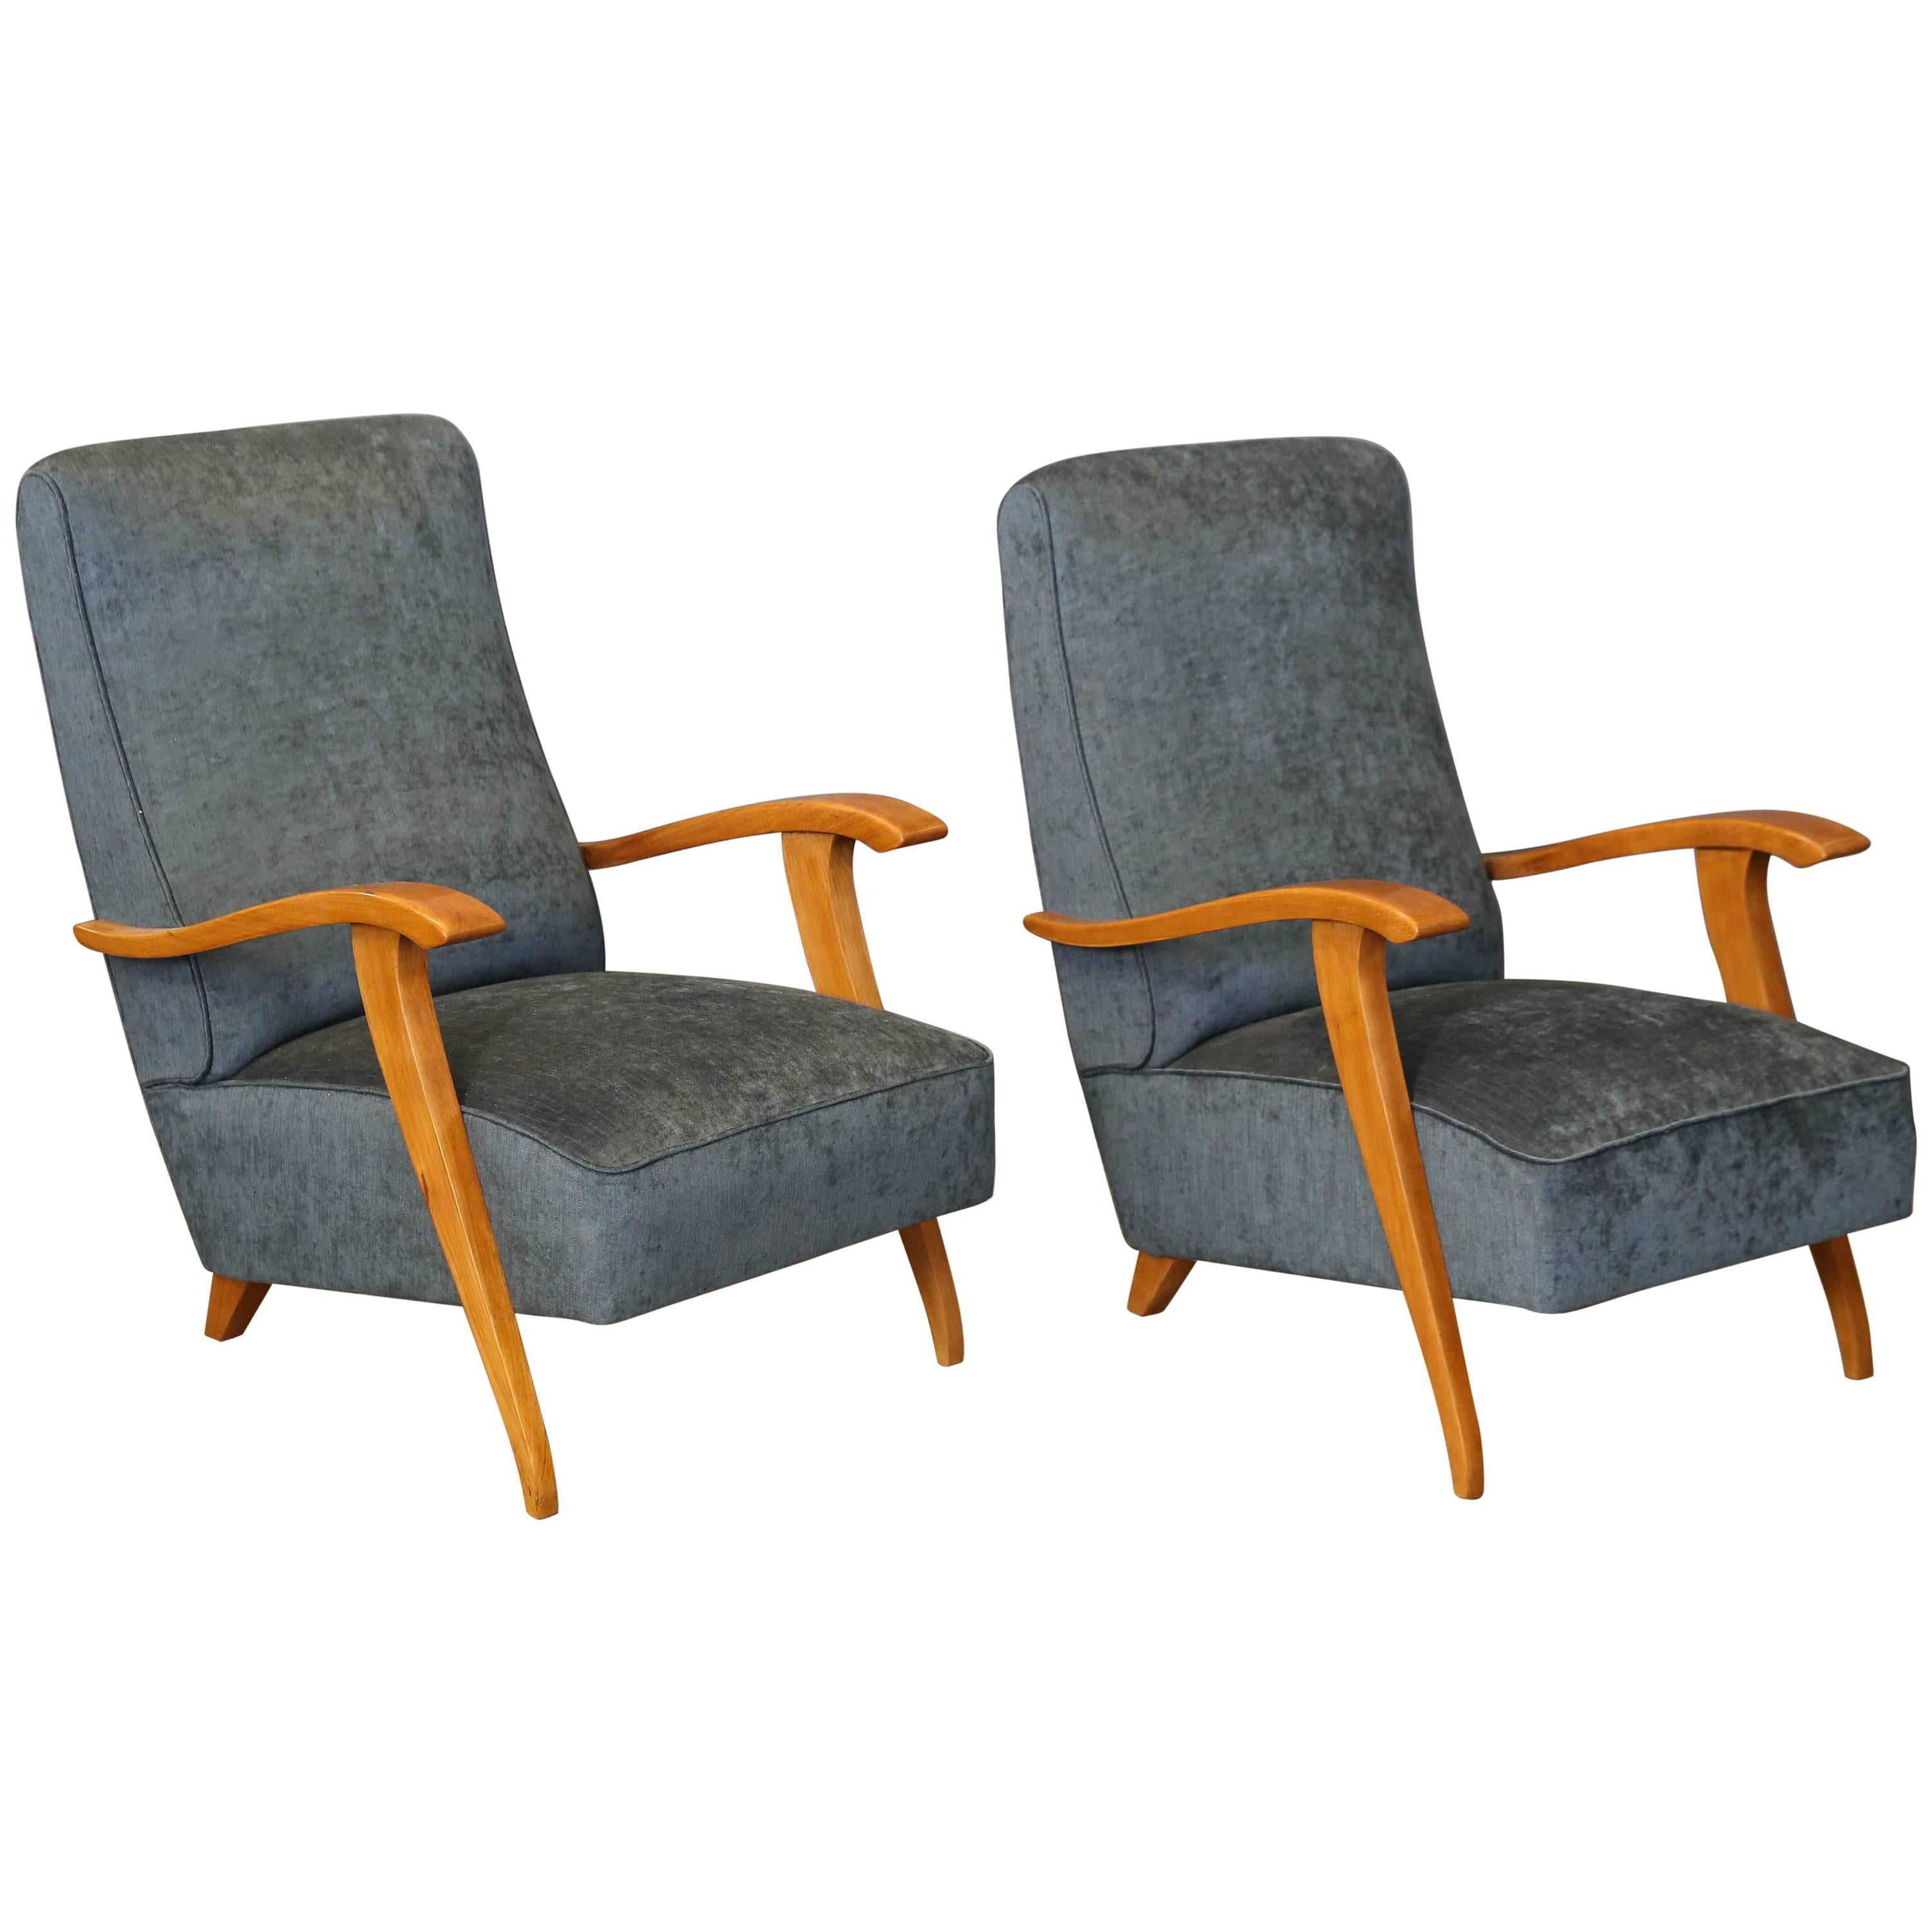 Midcentury French Chairs in Beechwood